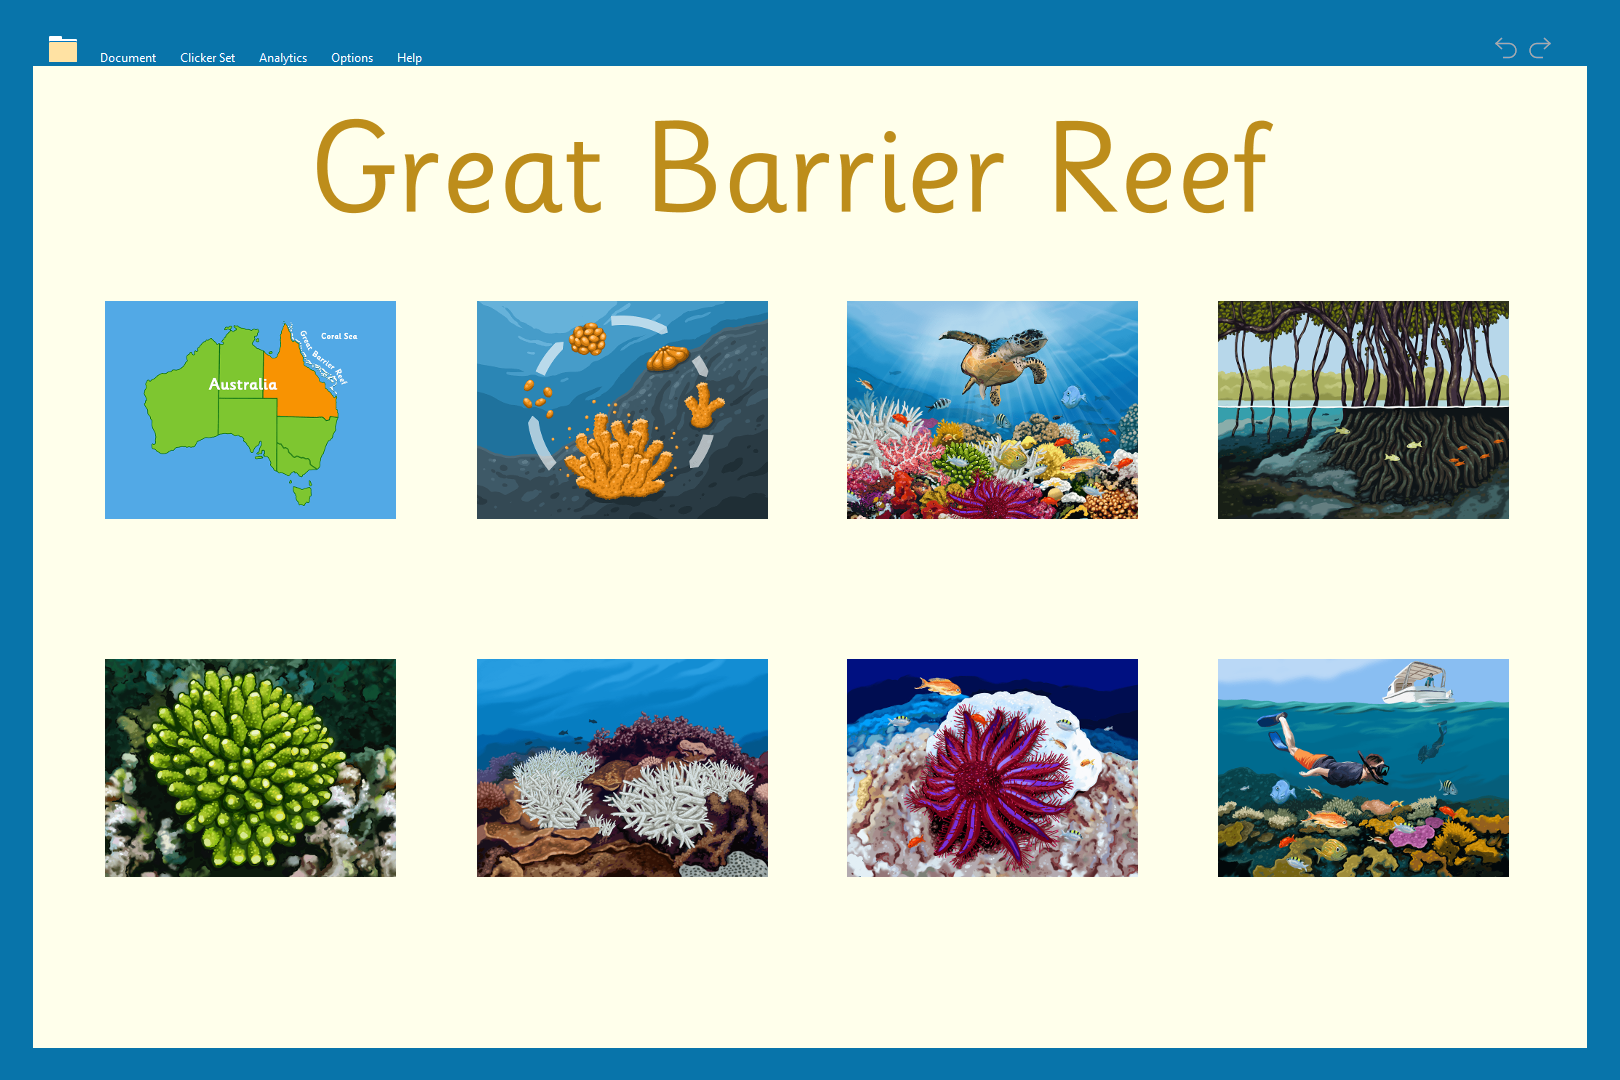 Discover the Great Barrier Reef through Clicker-3